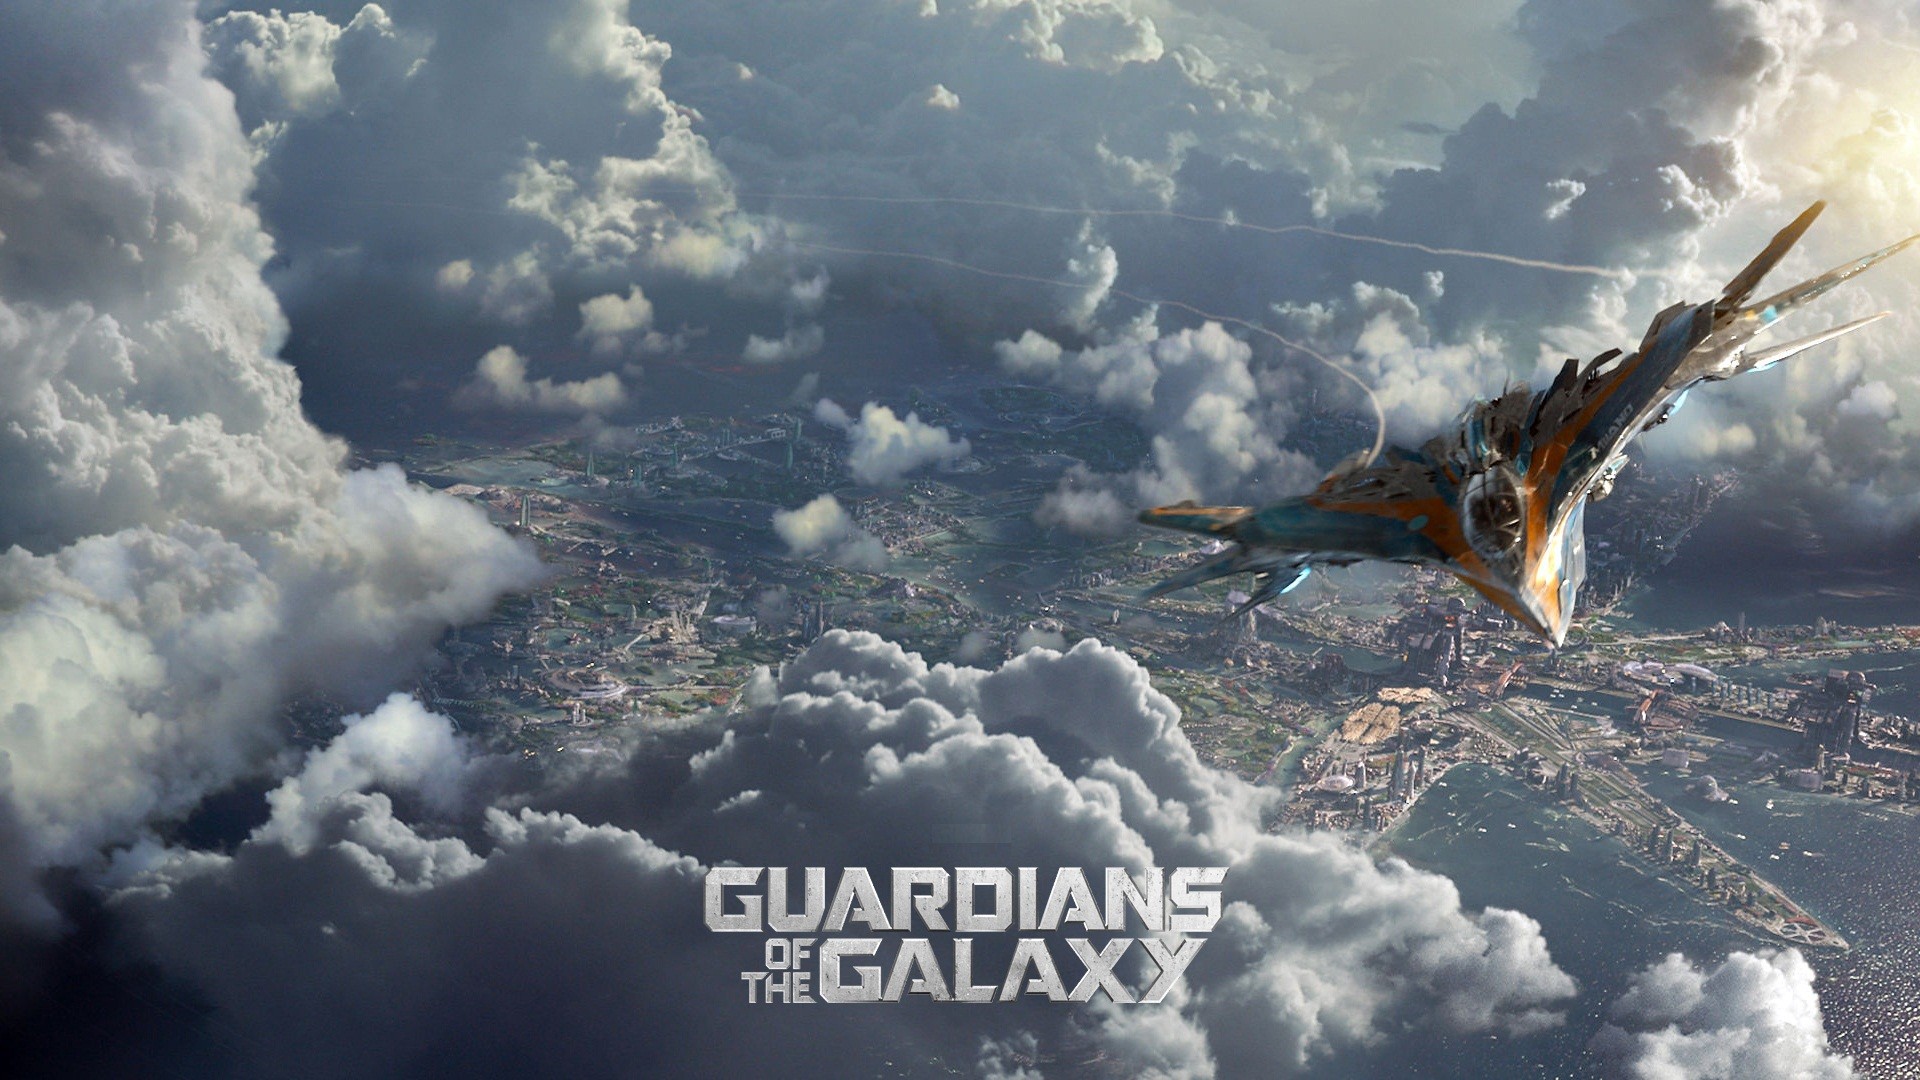 General 1920x1080 Guardians of the Galaxy movies Marvel Cinematic Universe science fiction vehicle